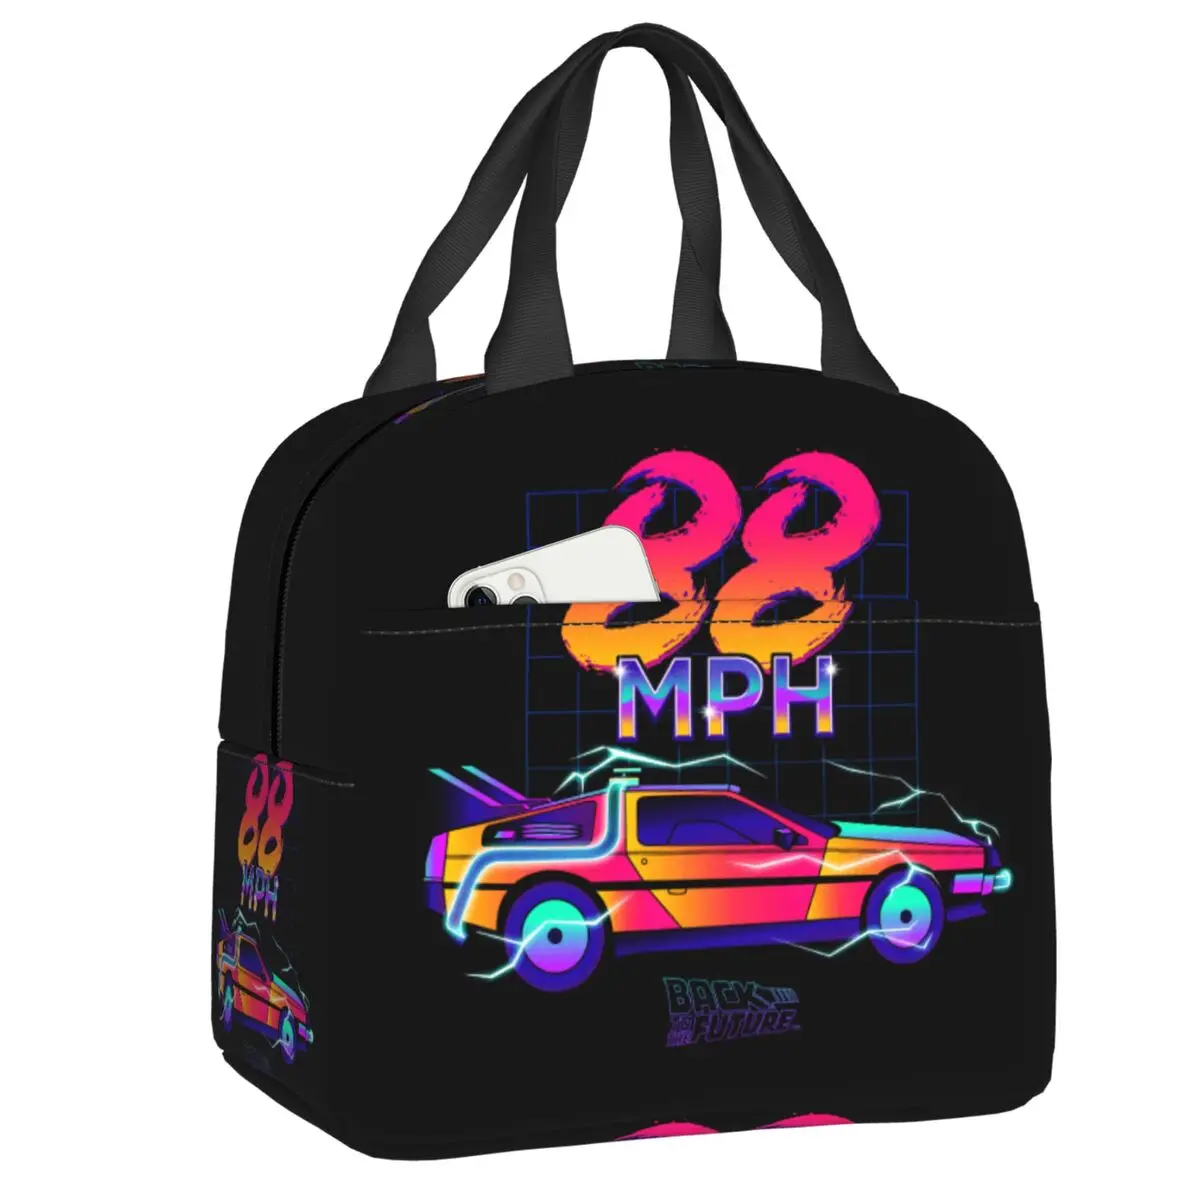 

Hill Valley Back To The Future Insulated Lunch Bag for Women Men Leakproof Thermal Cooler Lunch Tote Box Office Picnic Travel